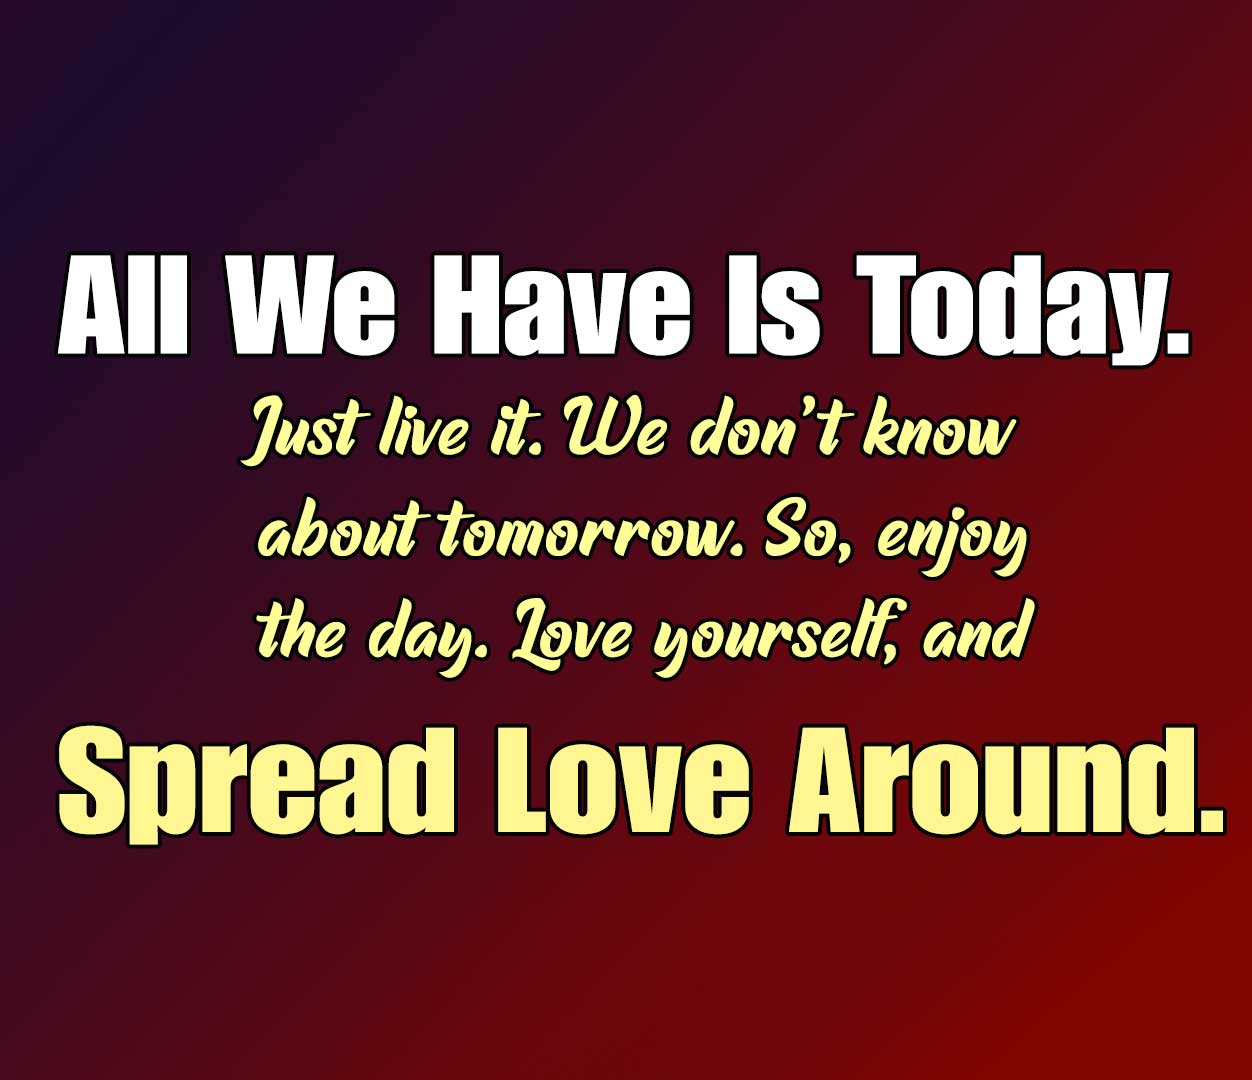 All we have is today. Just live it. We don’t know about tomorrow. So, enjoy the day. Love yourself, and spread love around.